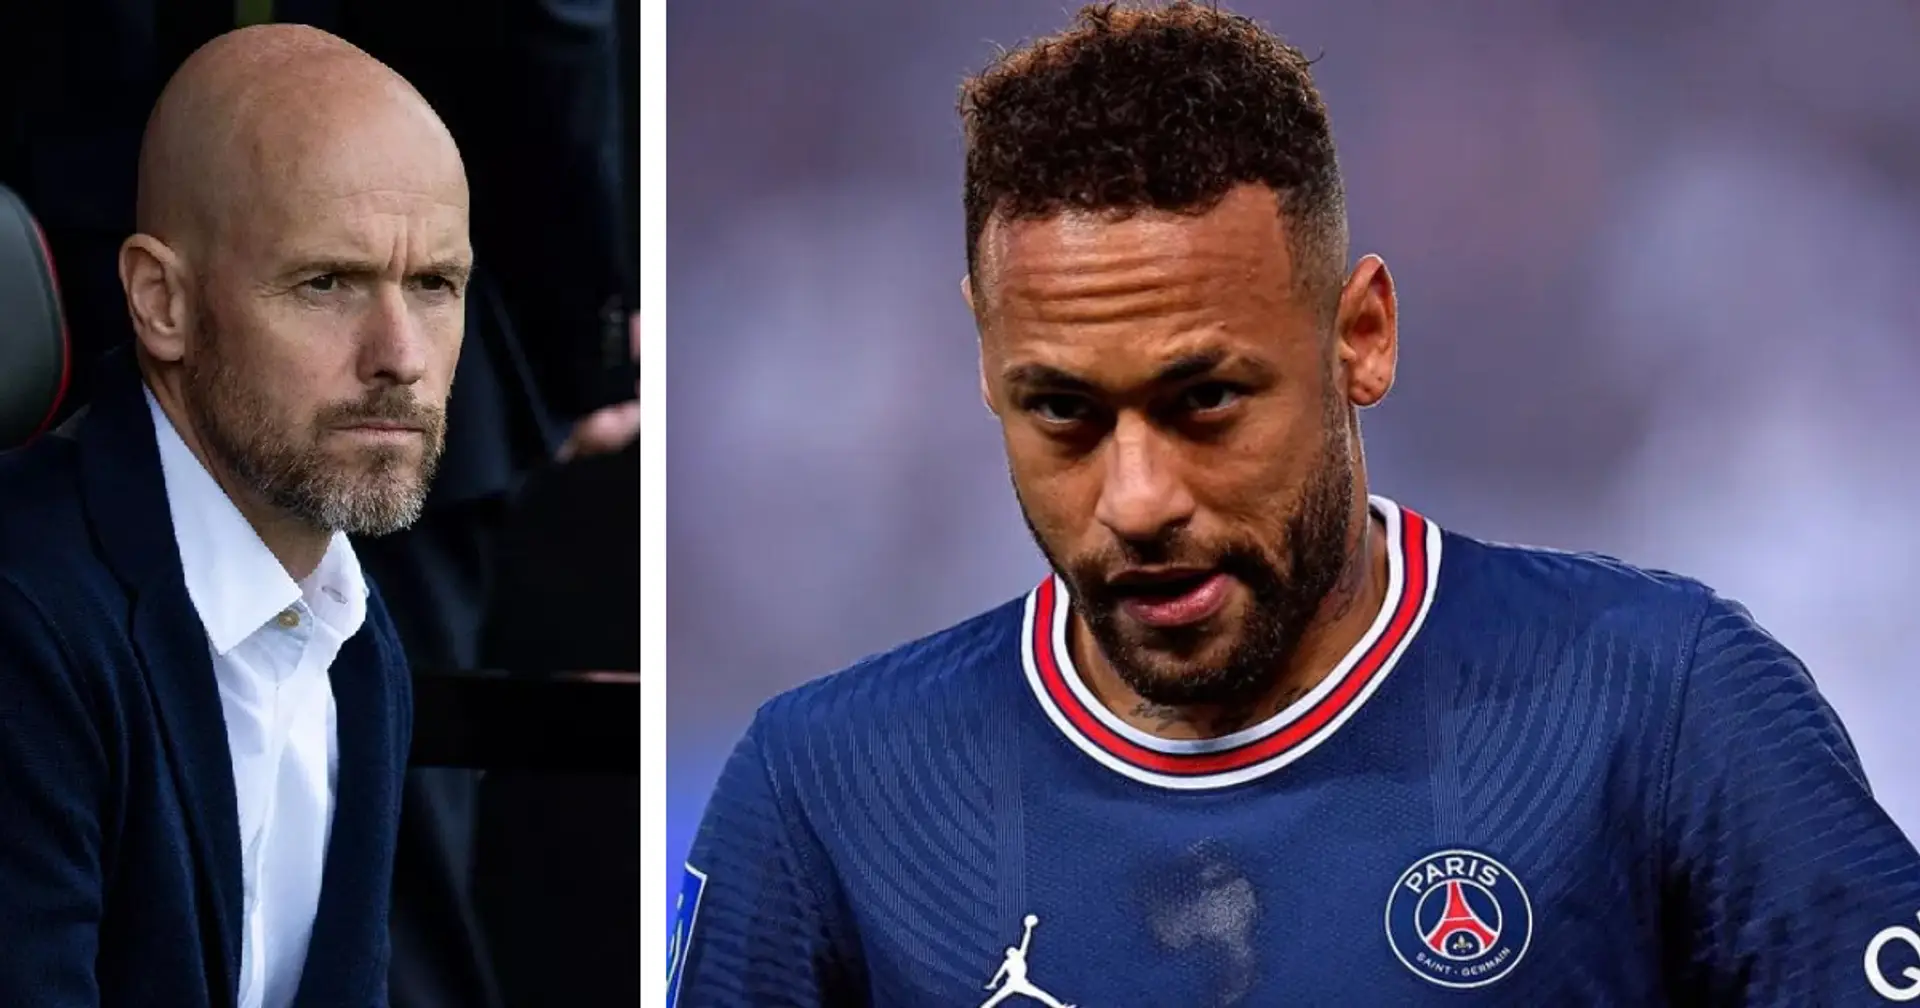 Man United 'not pursuing' Neymar at the moment — but the situation could change soon (reliability: 4 stars)